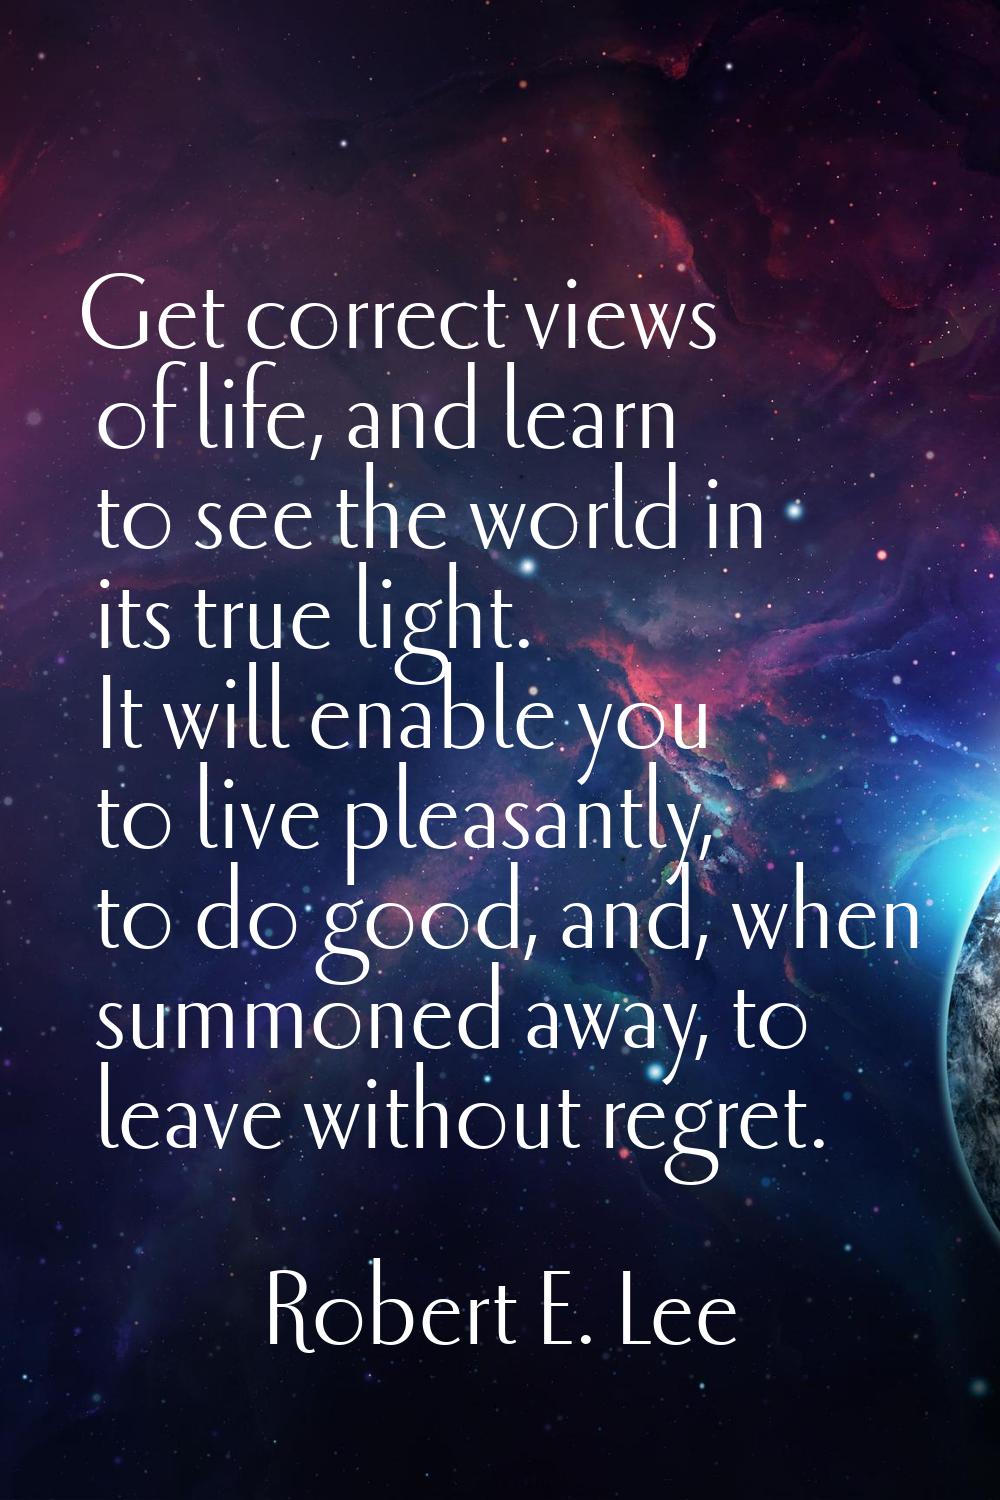 Get correct views of life, and learn to see the world in its true light. It will enable you to live